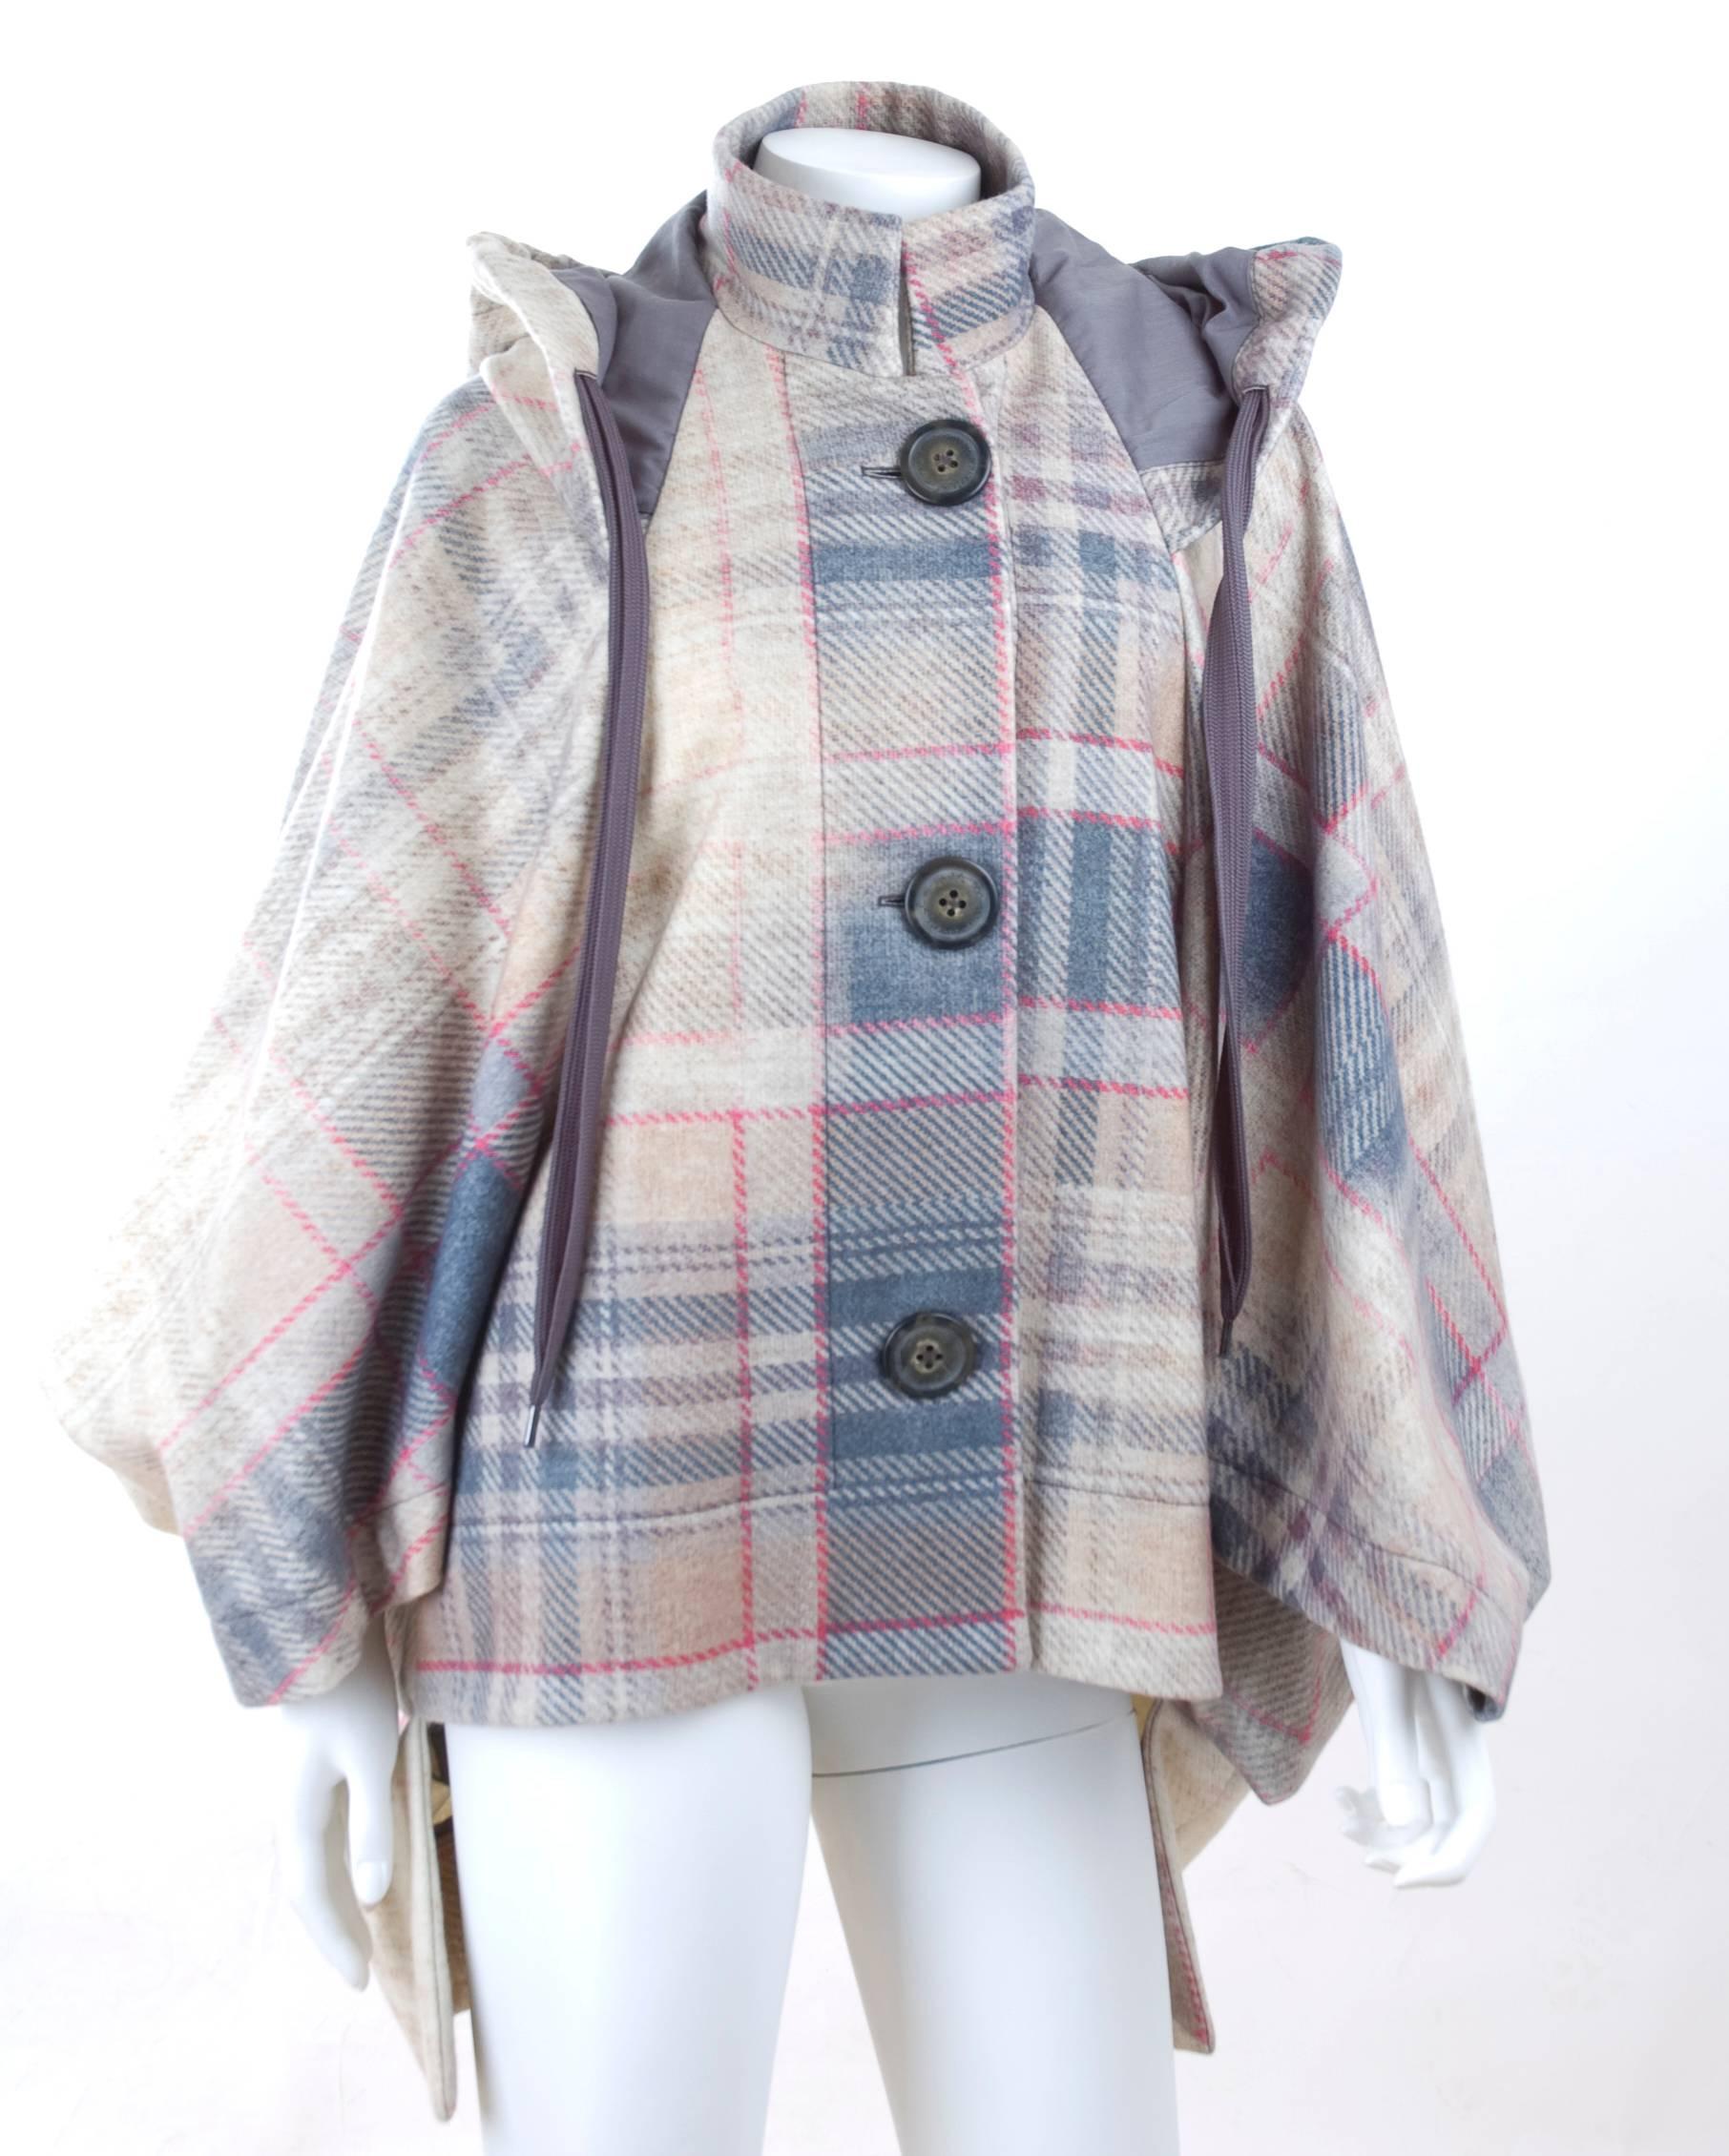 Vivienne Westwood Anglomania asymetrical cape in plaid tartan.
Colors are blue,creme, camel, grey and pink.
Excellent condition - no flaws to mention.
80% Wool 20% Polyamide
Size M